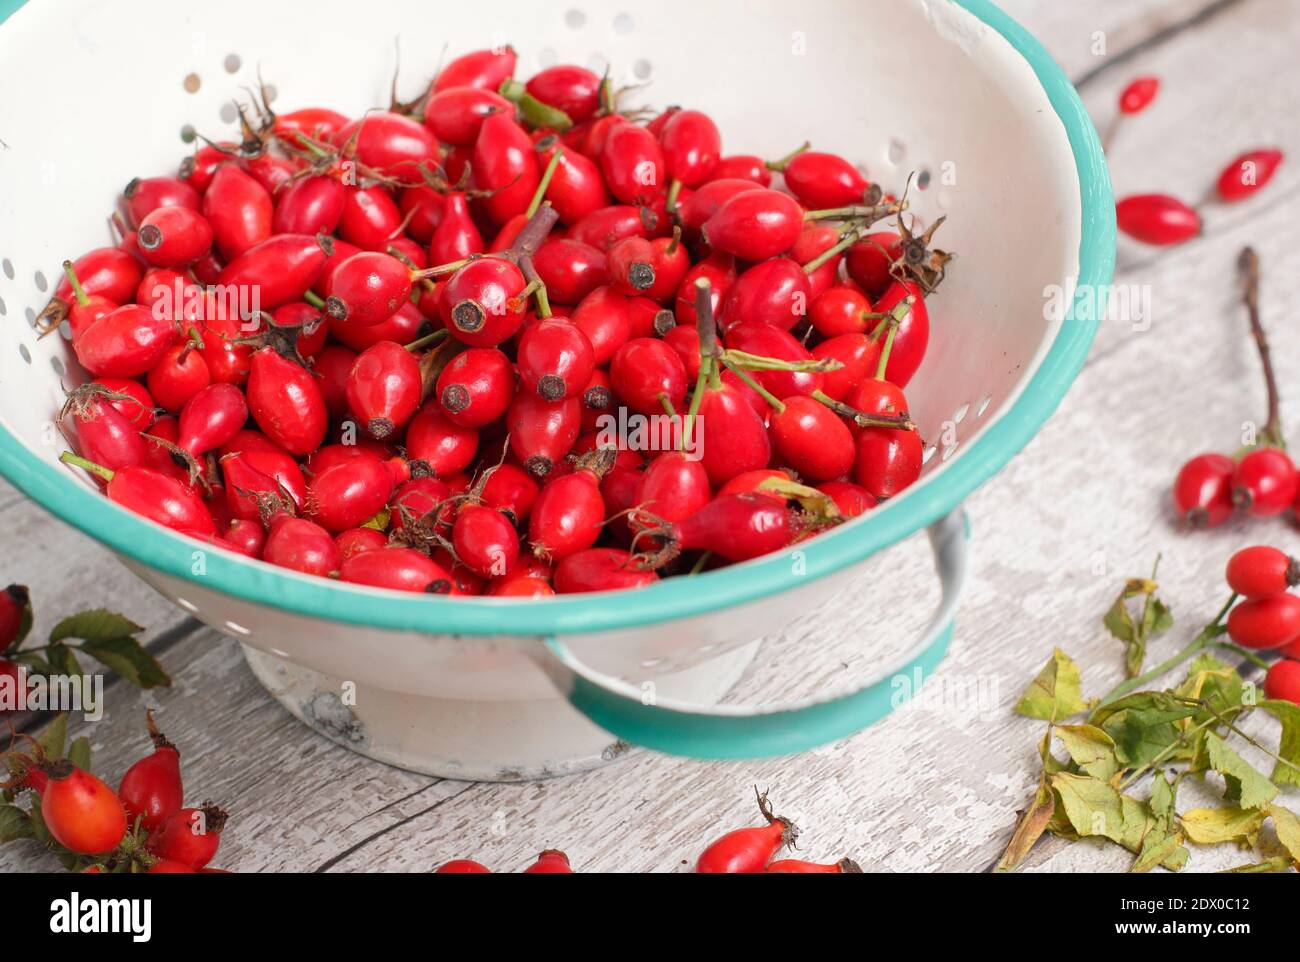 Common rosehips collected into a colander ready for making into syrup and jellies. UK Stock Photo